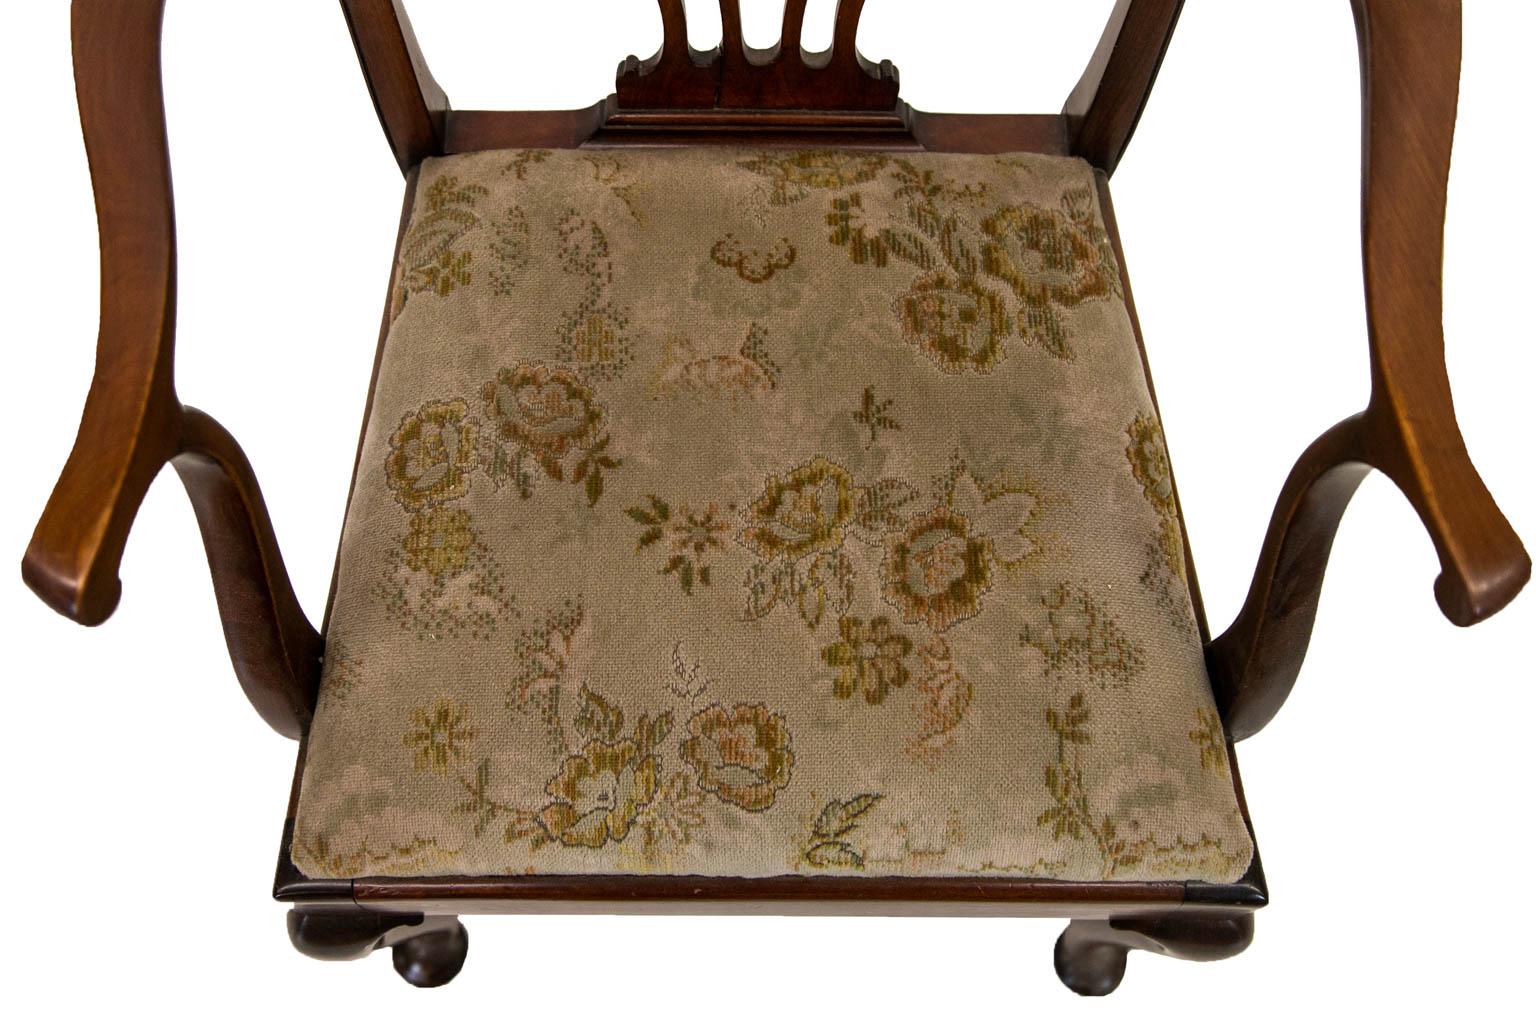 The back splat of this armchair is carved with pierced stylized Gothic arches. The crest rail has incised beading and two carved volutes. There are two shepherd's crook arms. The legs terminate in pad feet. The seat is removable. The upholstery has